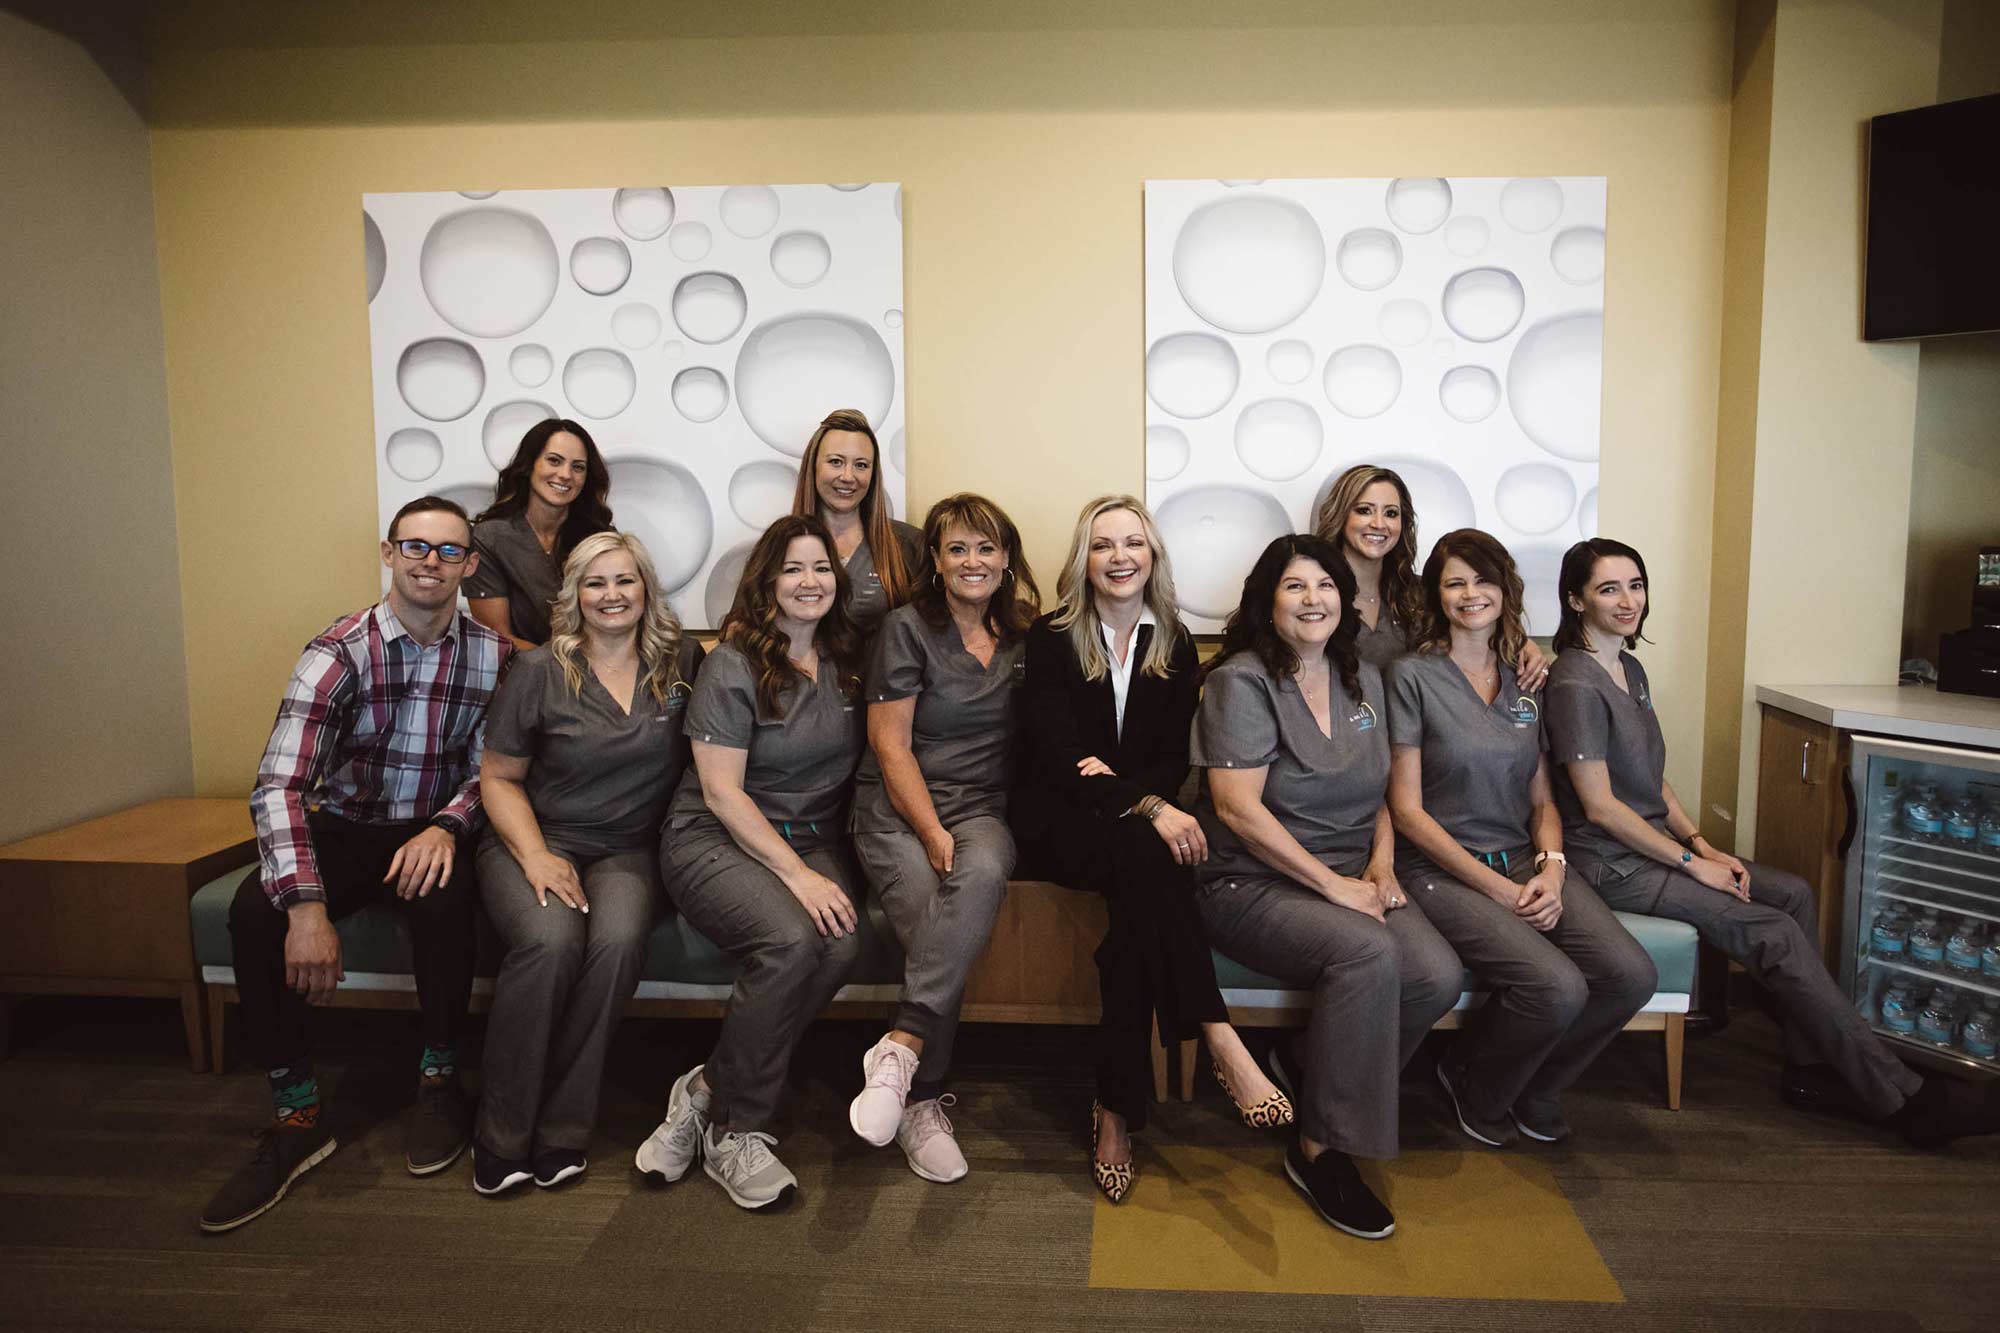 A photo of the Smile Gallery Pediatric Dentistry team